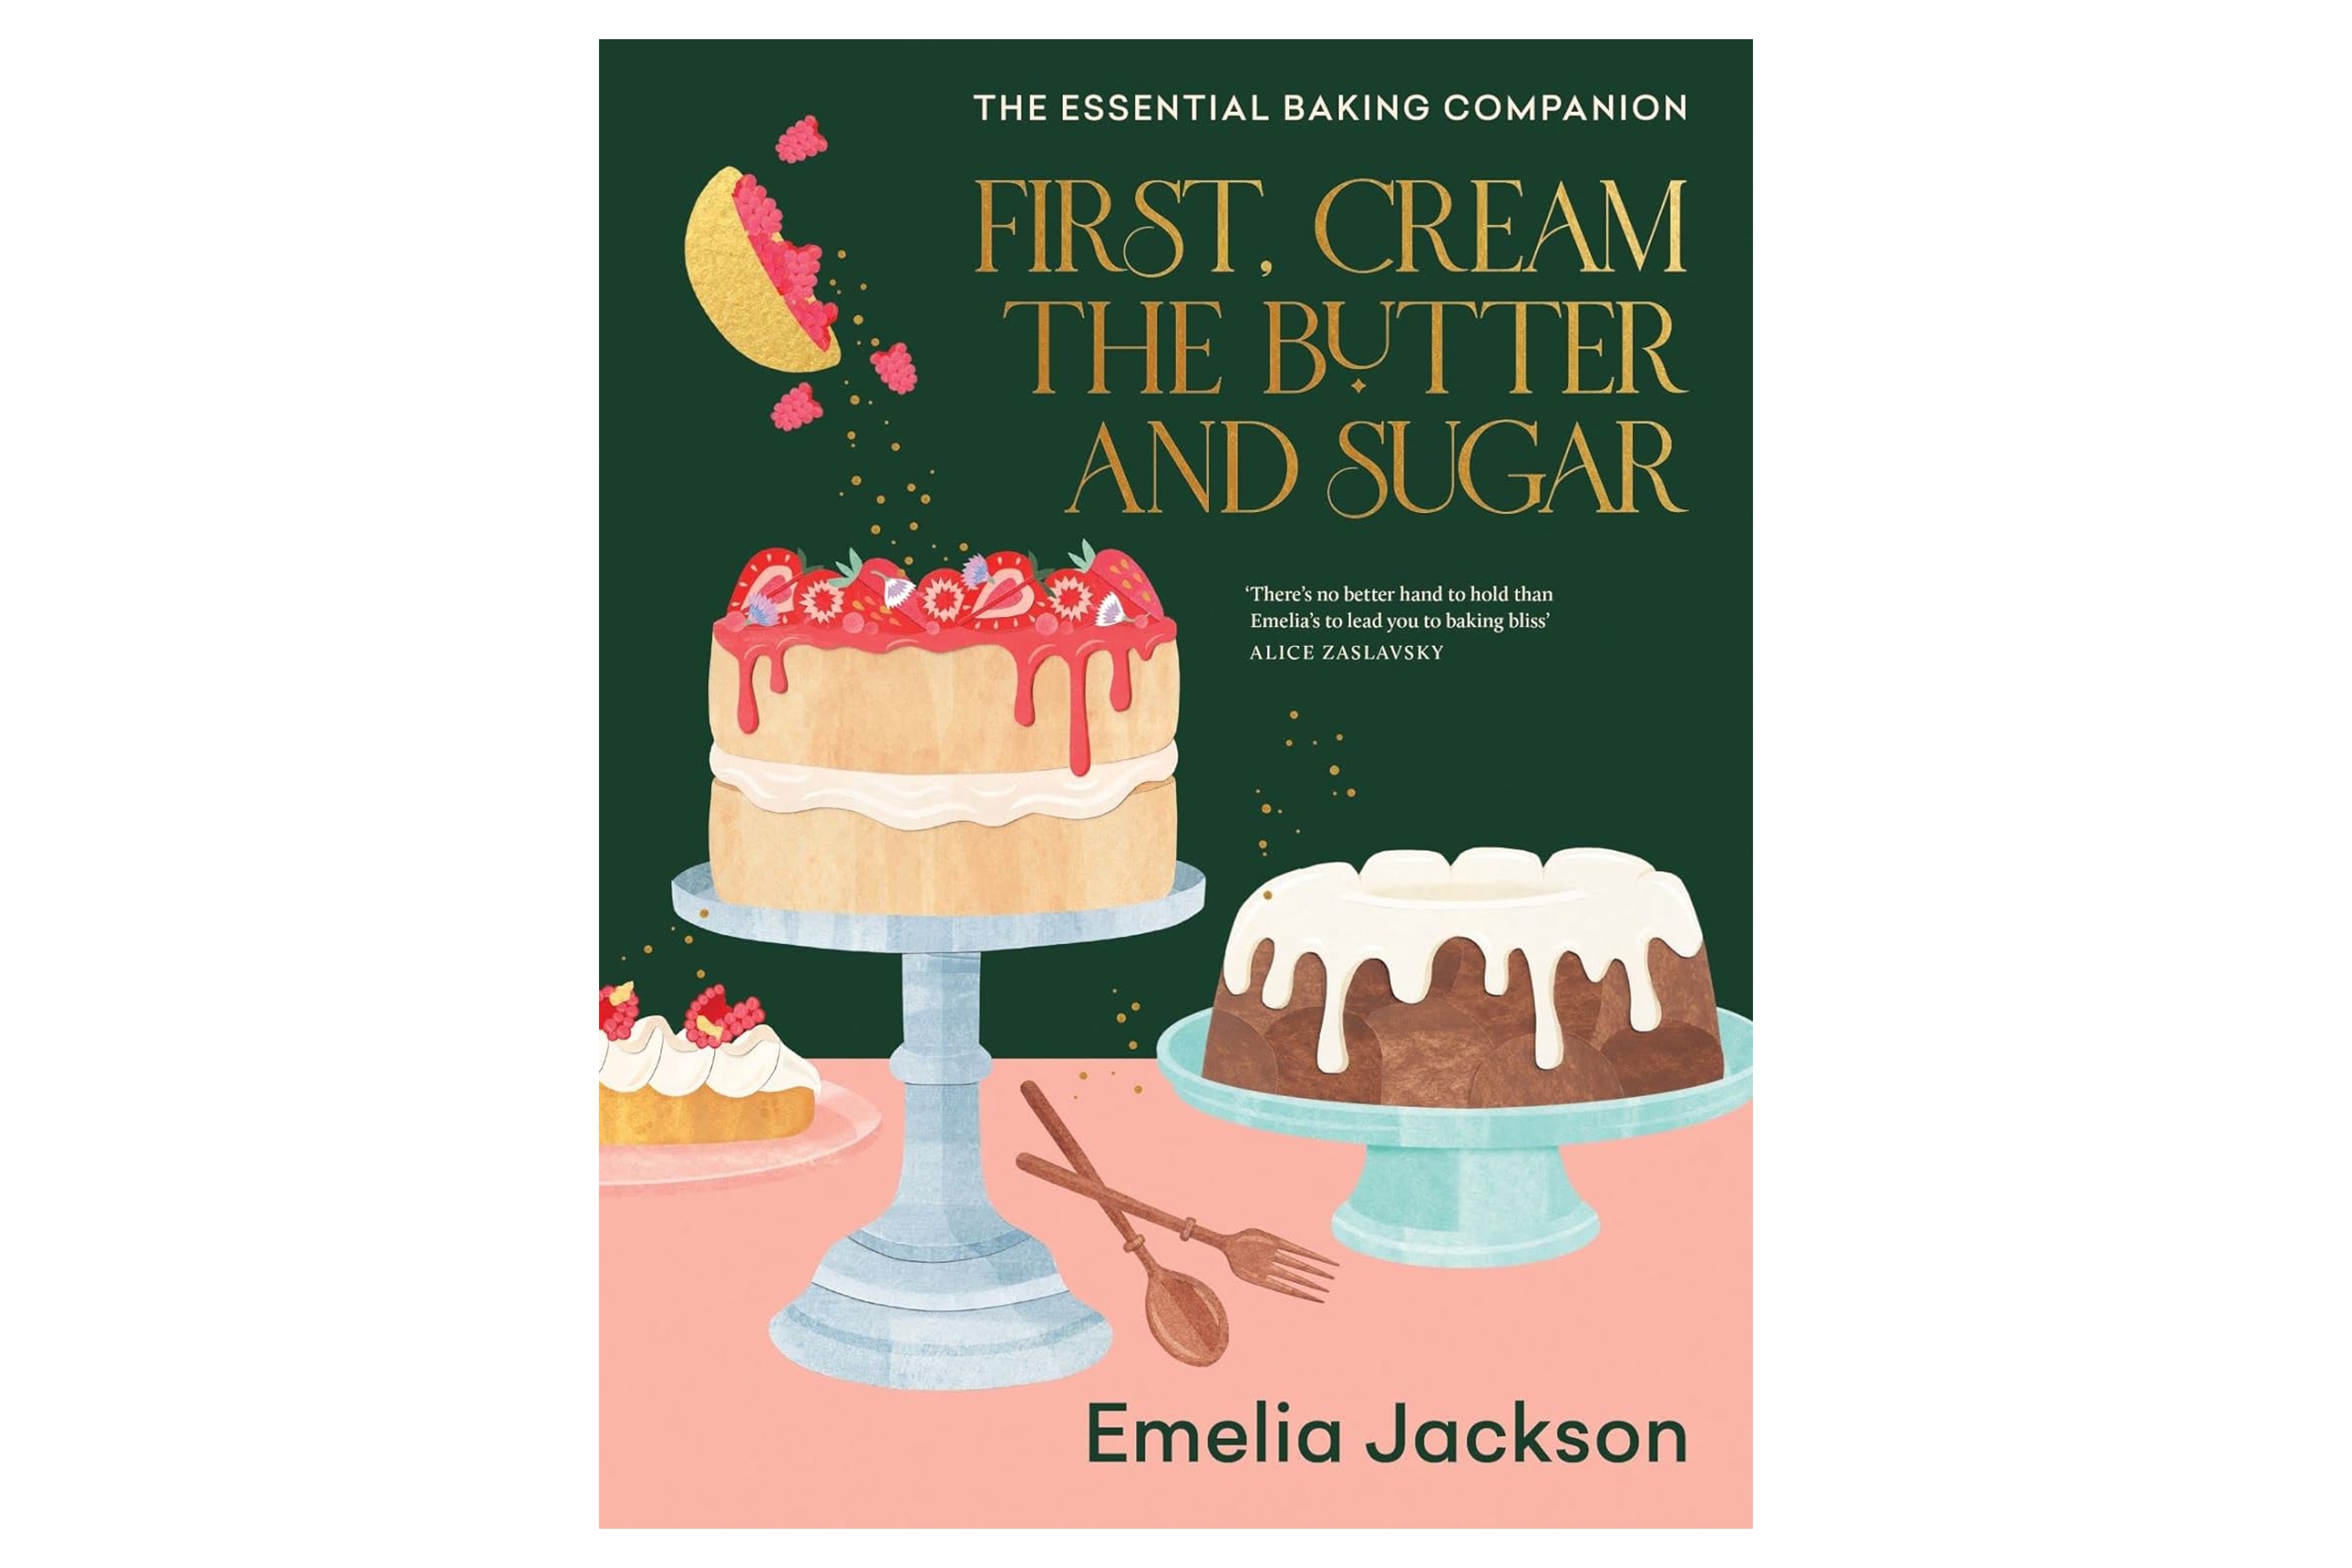 First, Cream the Butter and Sugar / Emelia Jackson